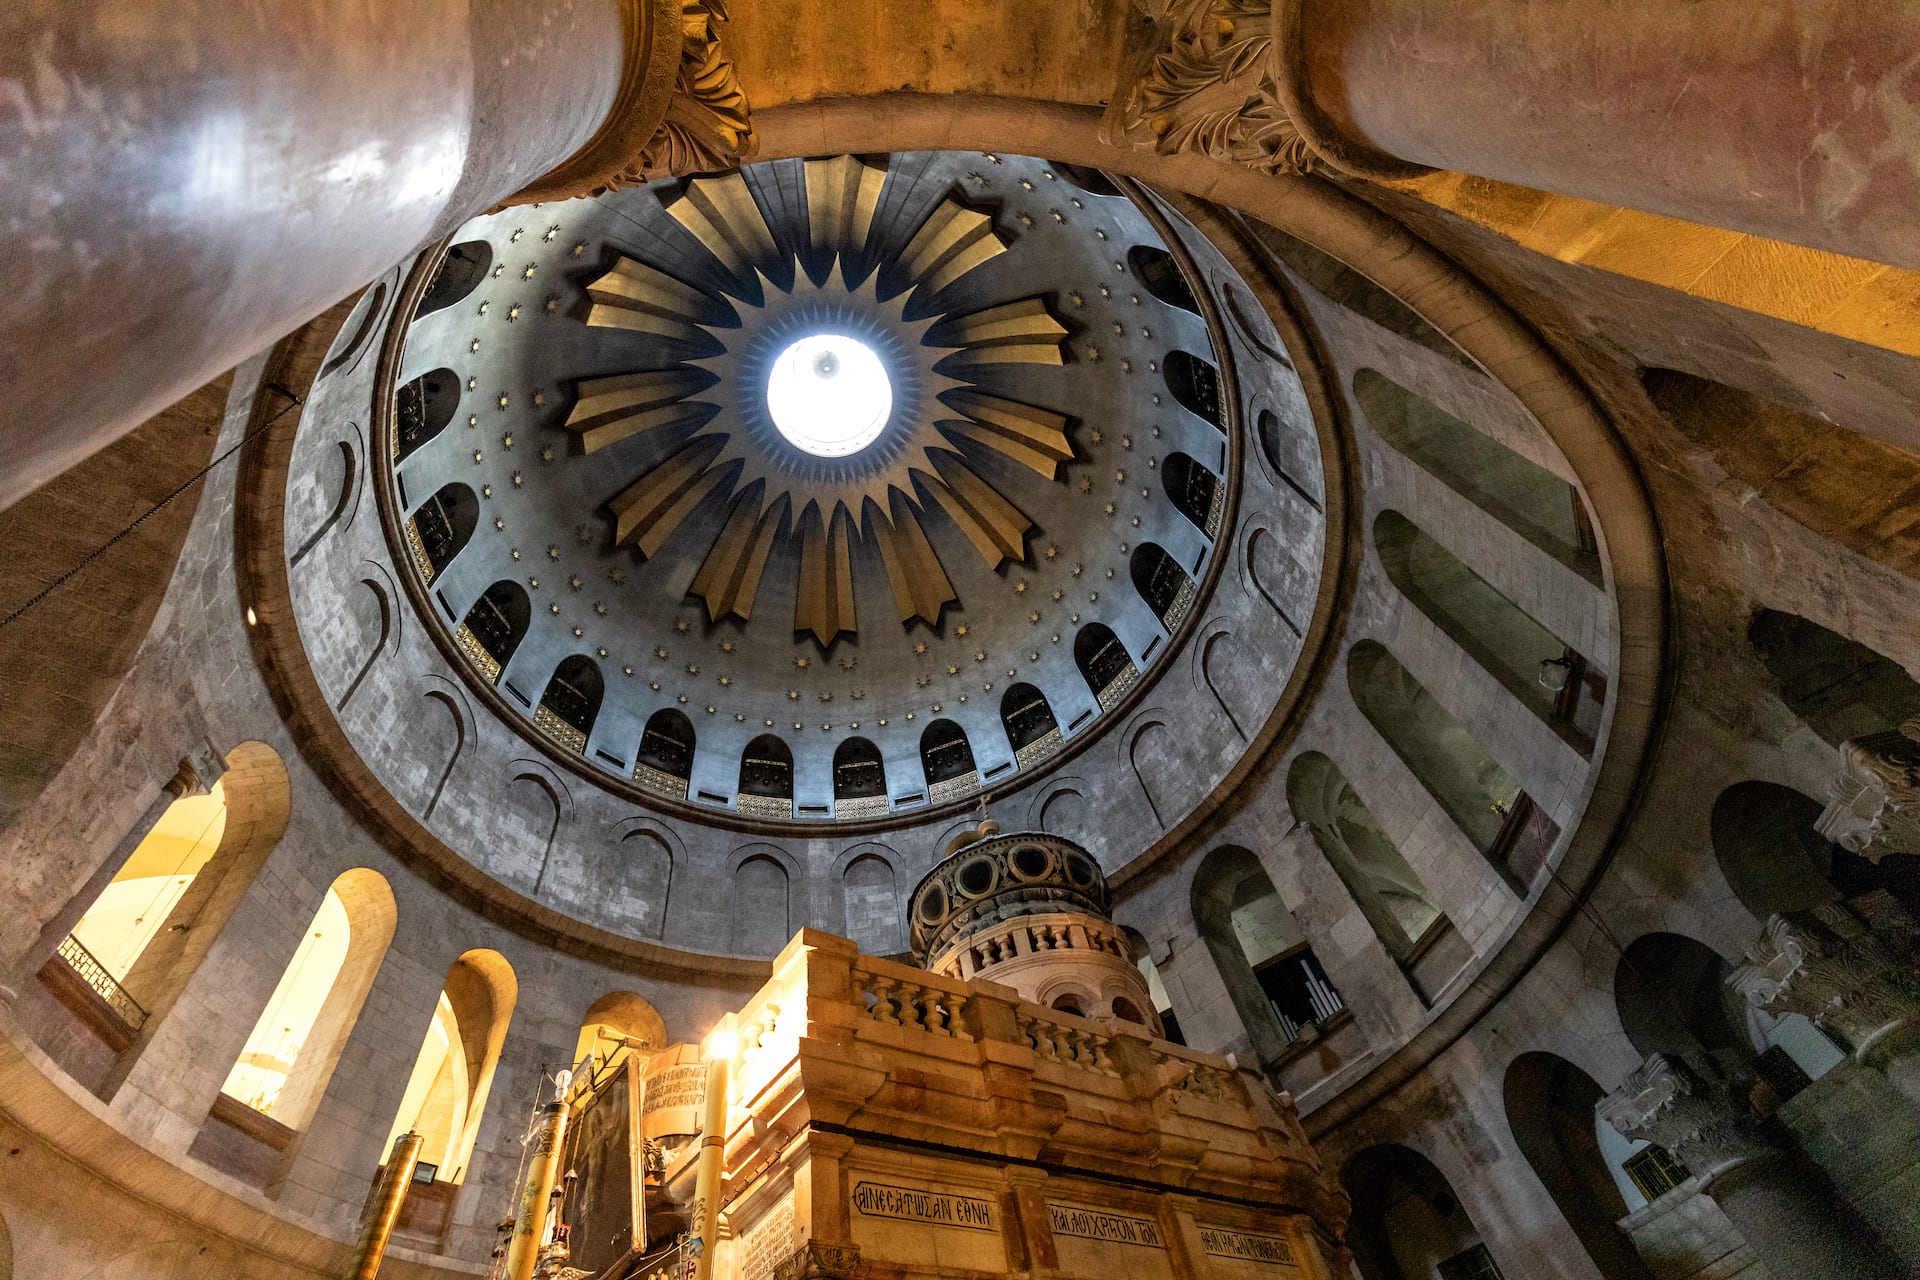 Dome inside the Church of the Holy Sepulcher